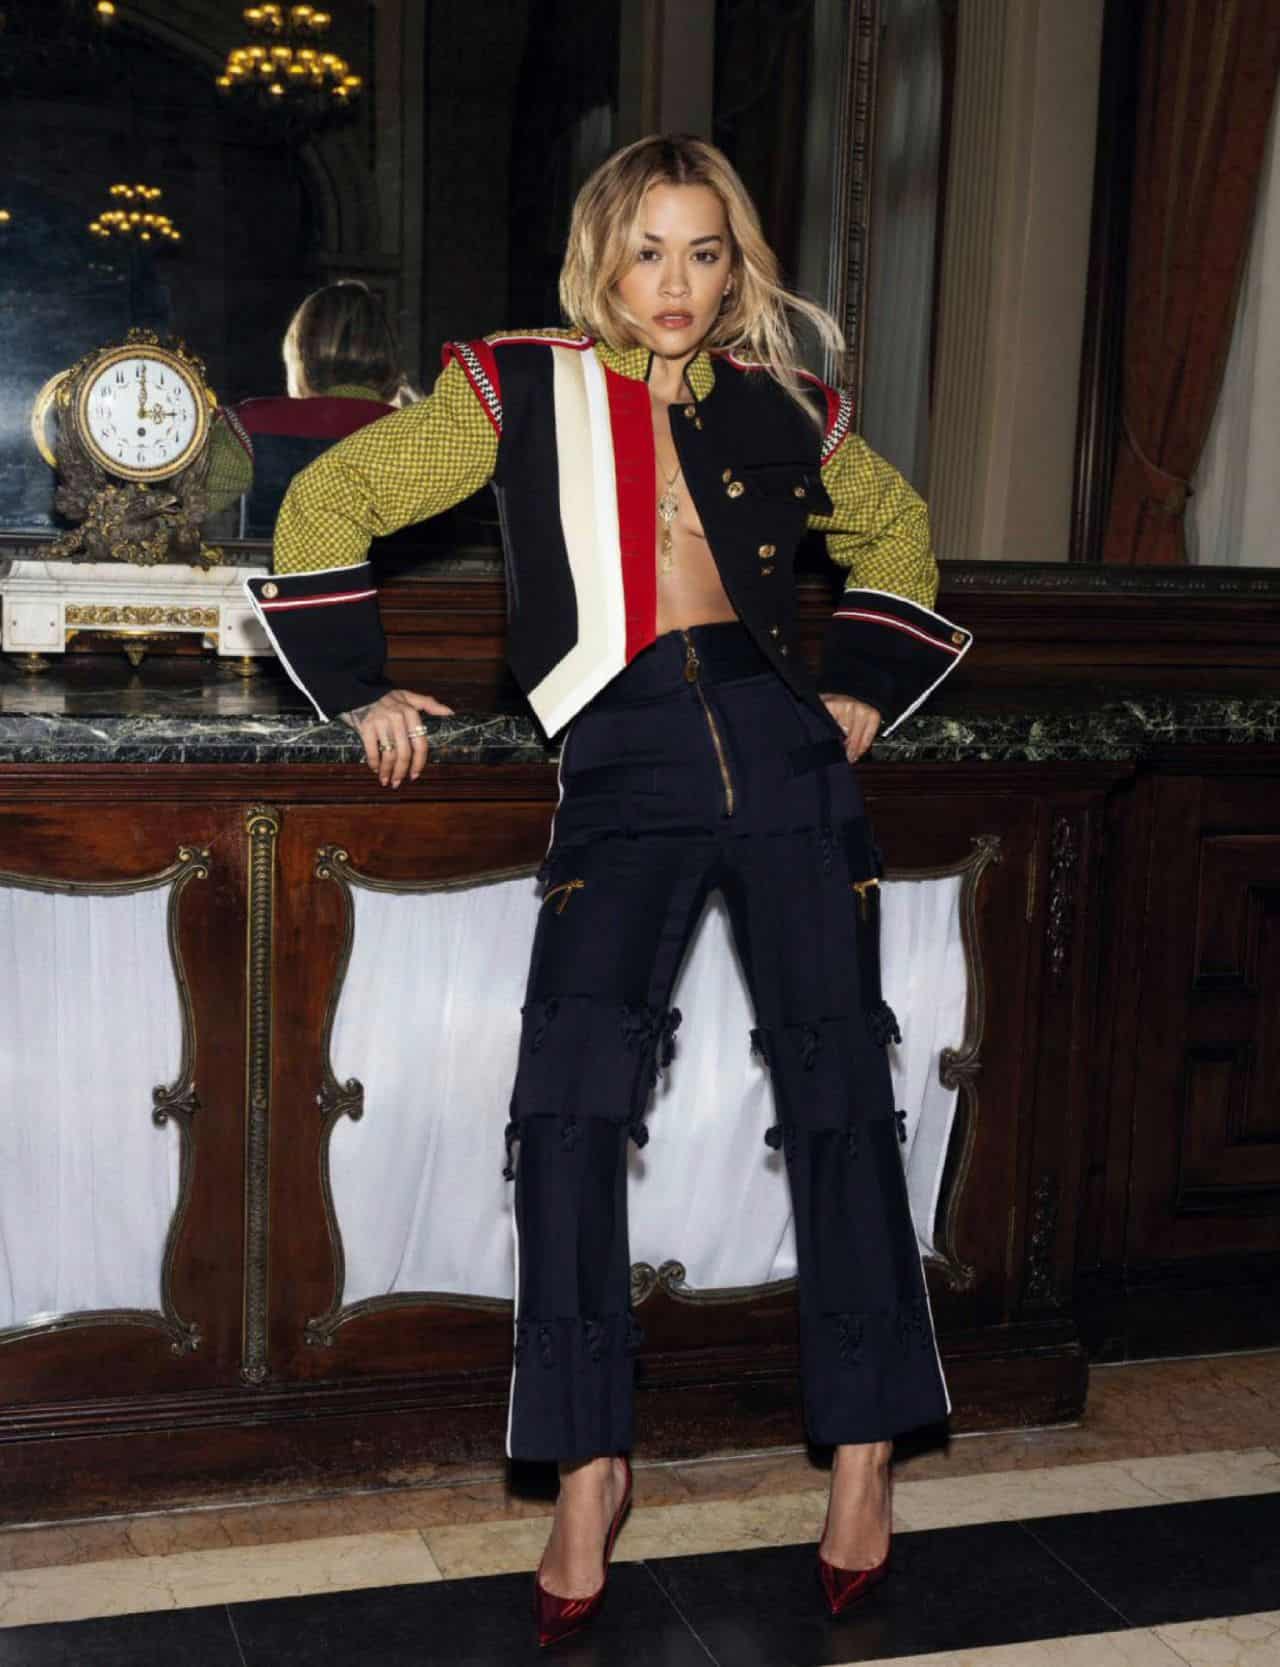 Rita Ora is the Cover Star of ELLE Magazine Spain March 2022 Issue